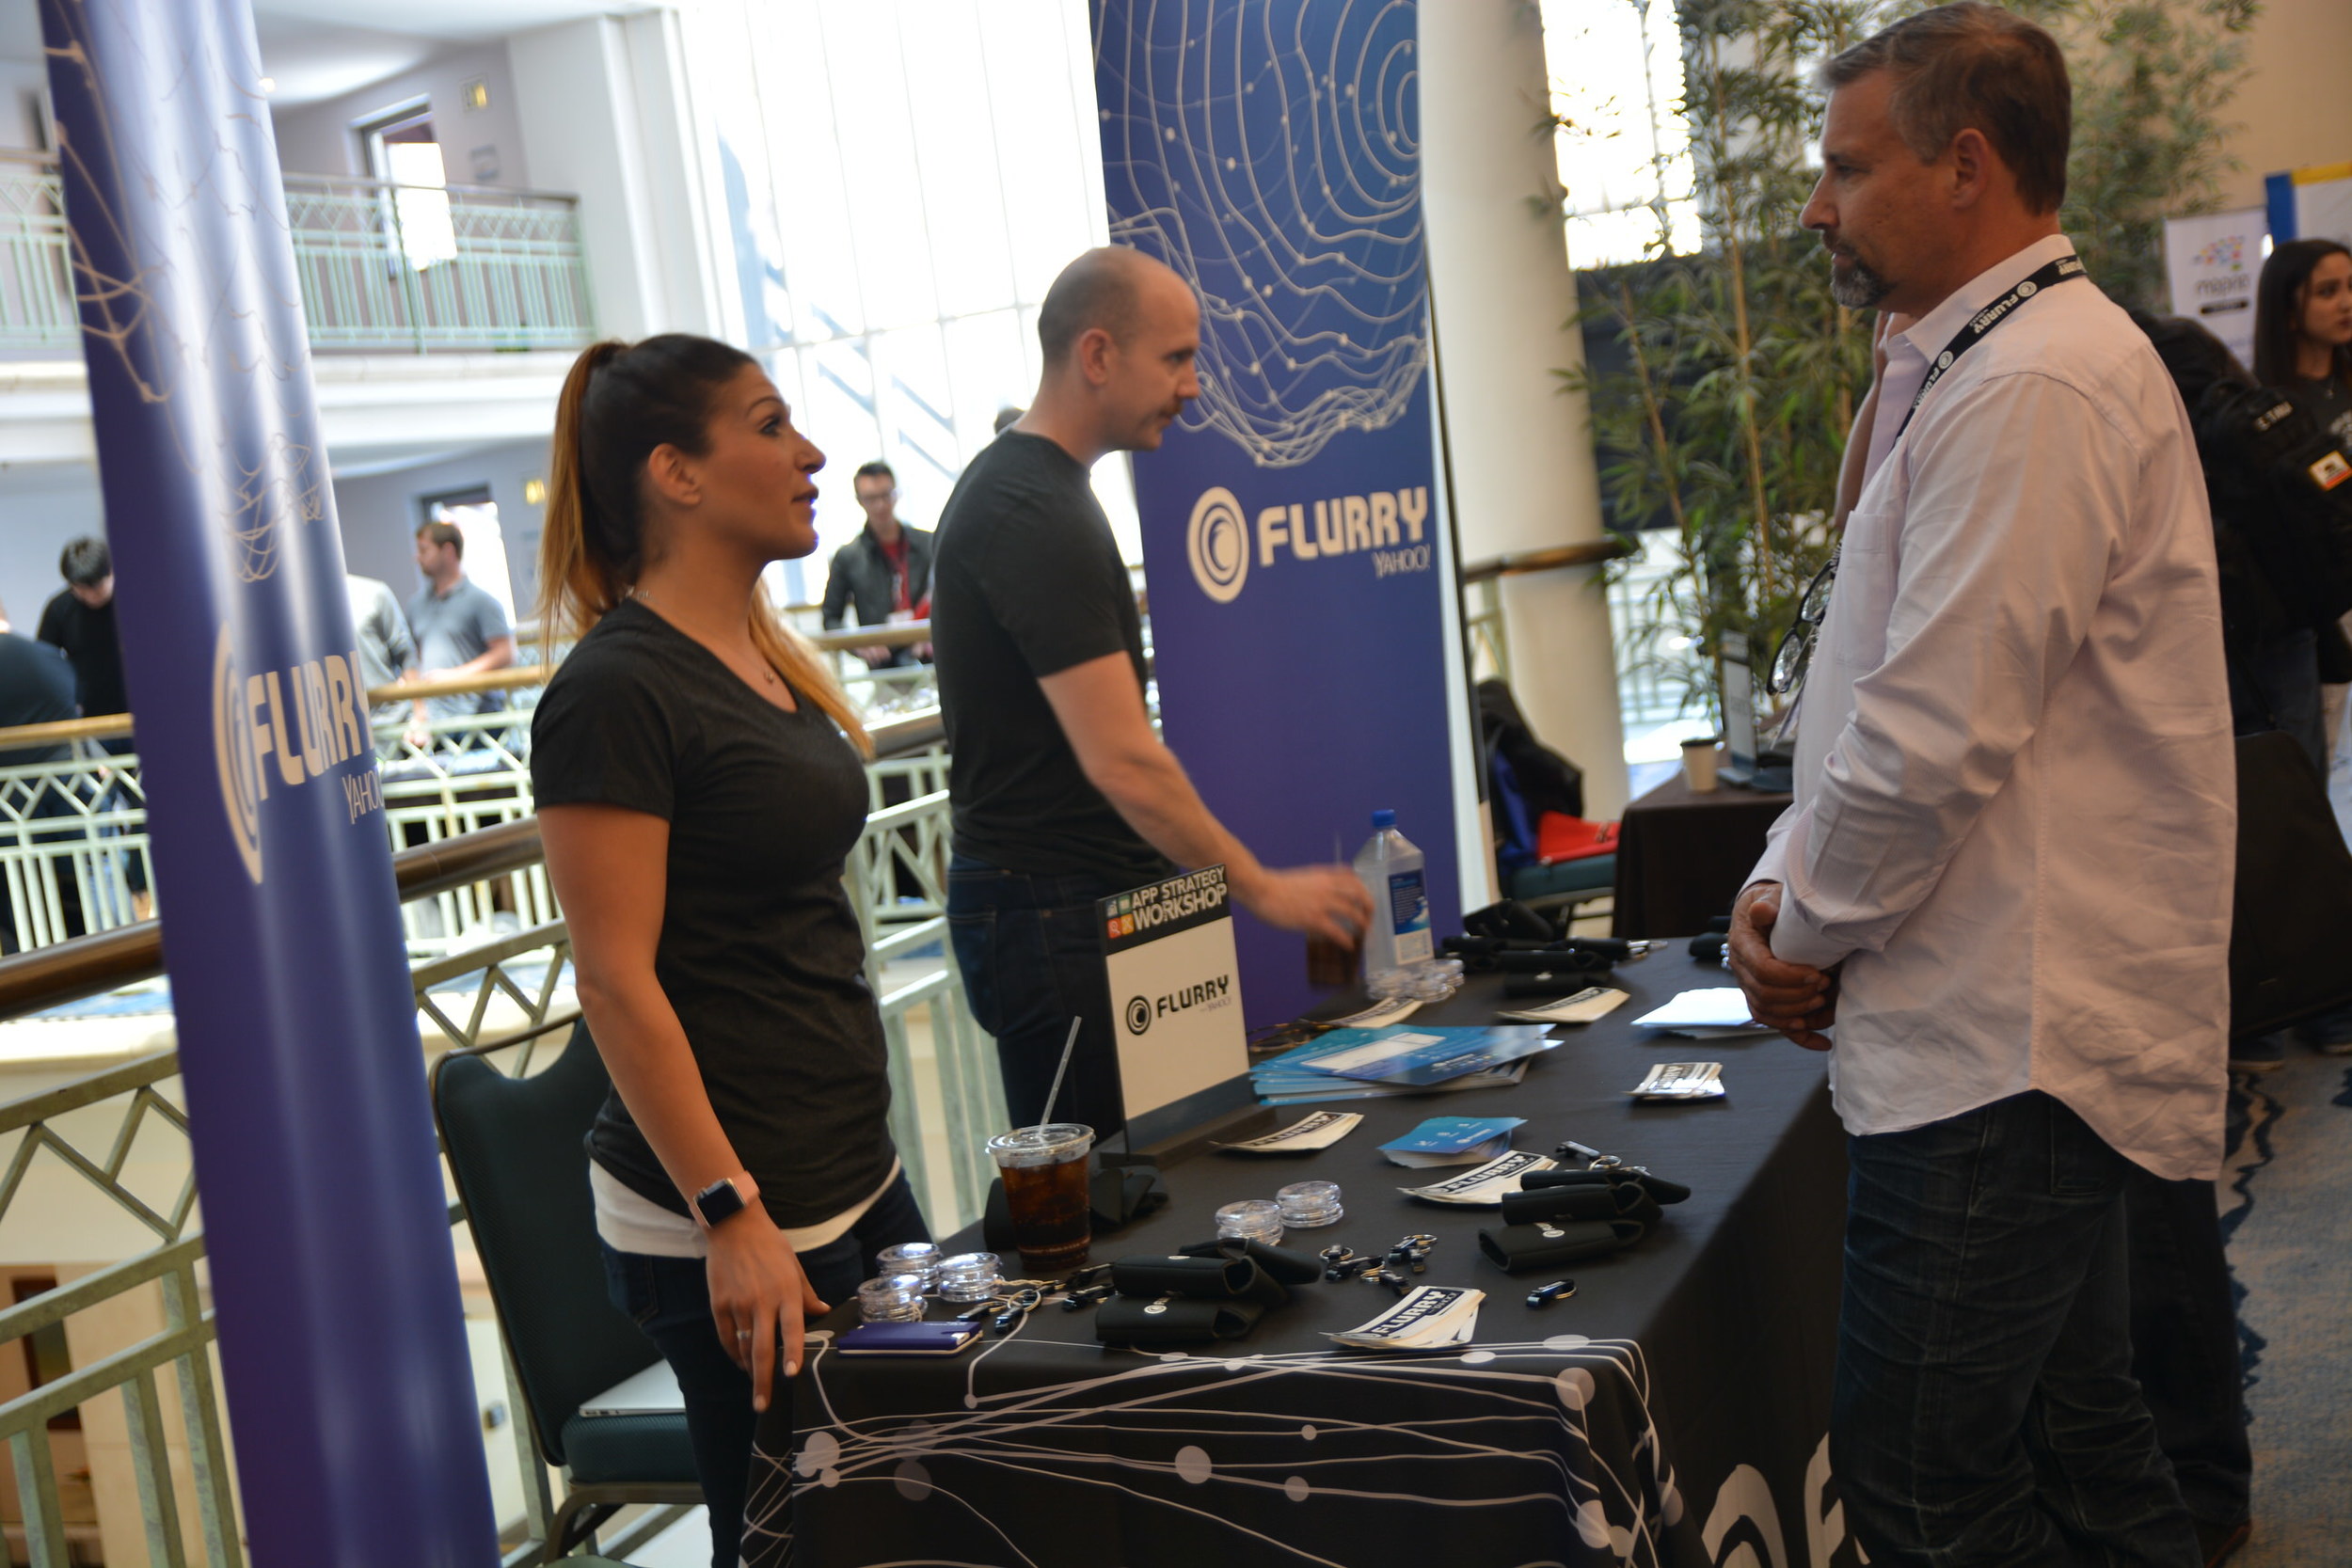 Our sponsor, Flurry, talking to attendees 